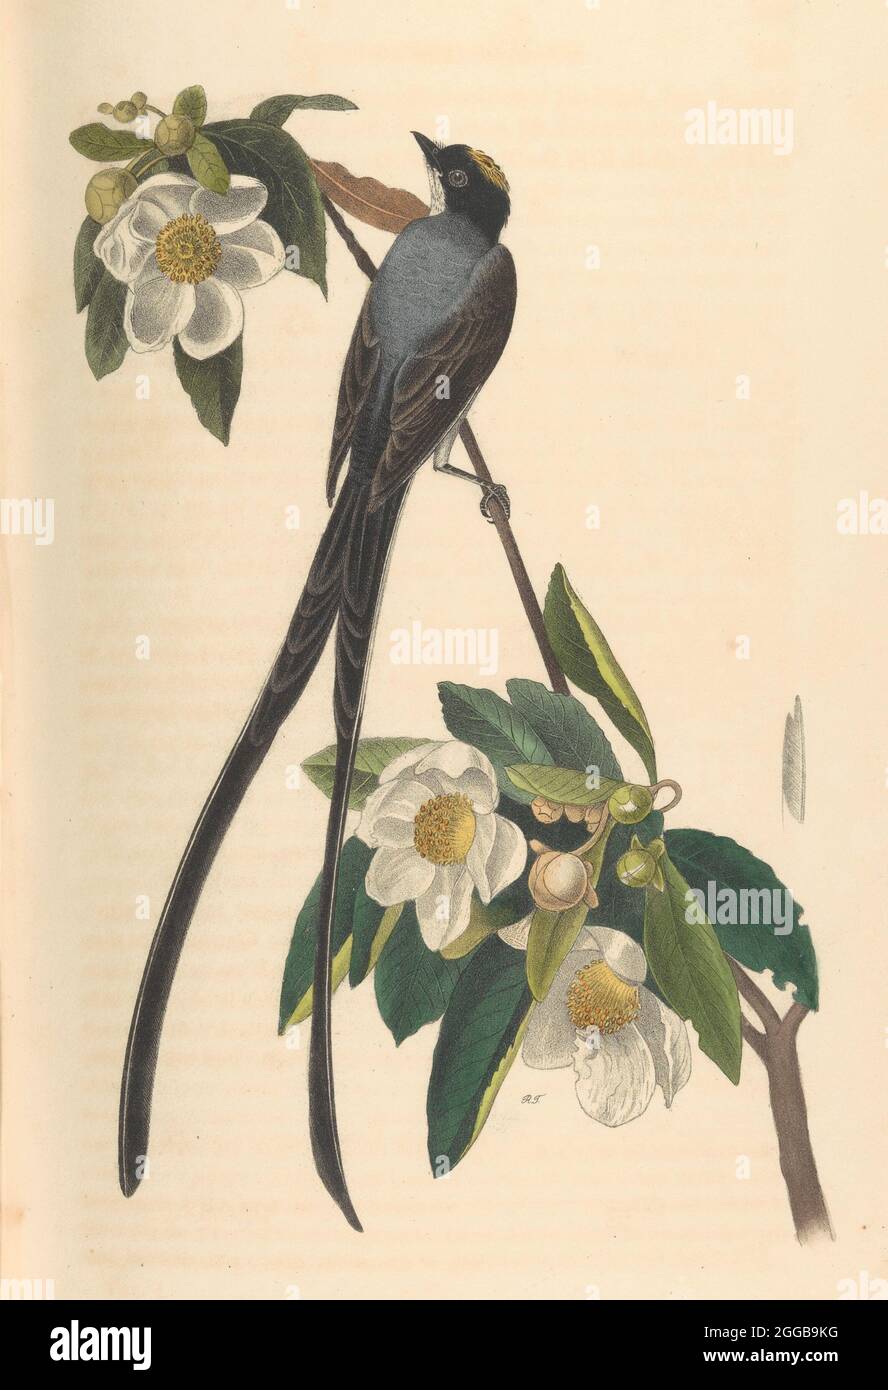 Fork-tailed Flycatcher, Gordonia lasianthus, 1840-44. From The Birds of America from Drawings Made in the United States. Stock Photo